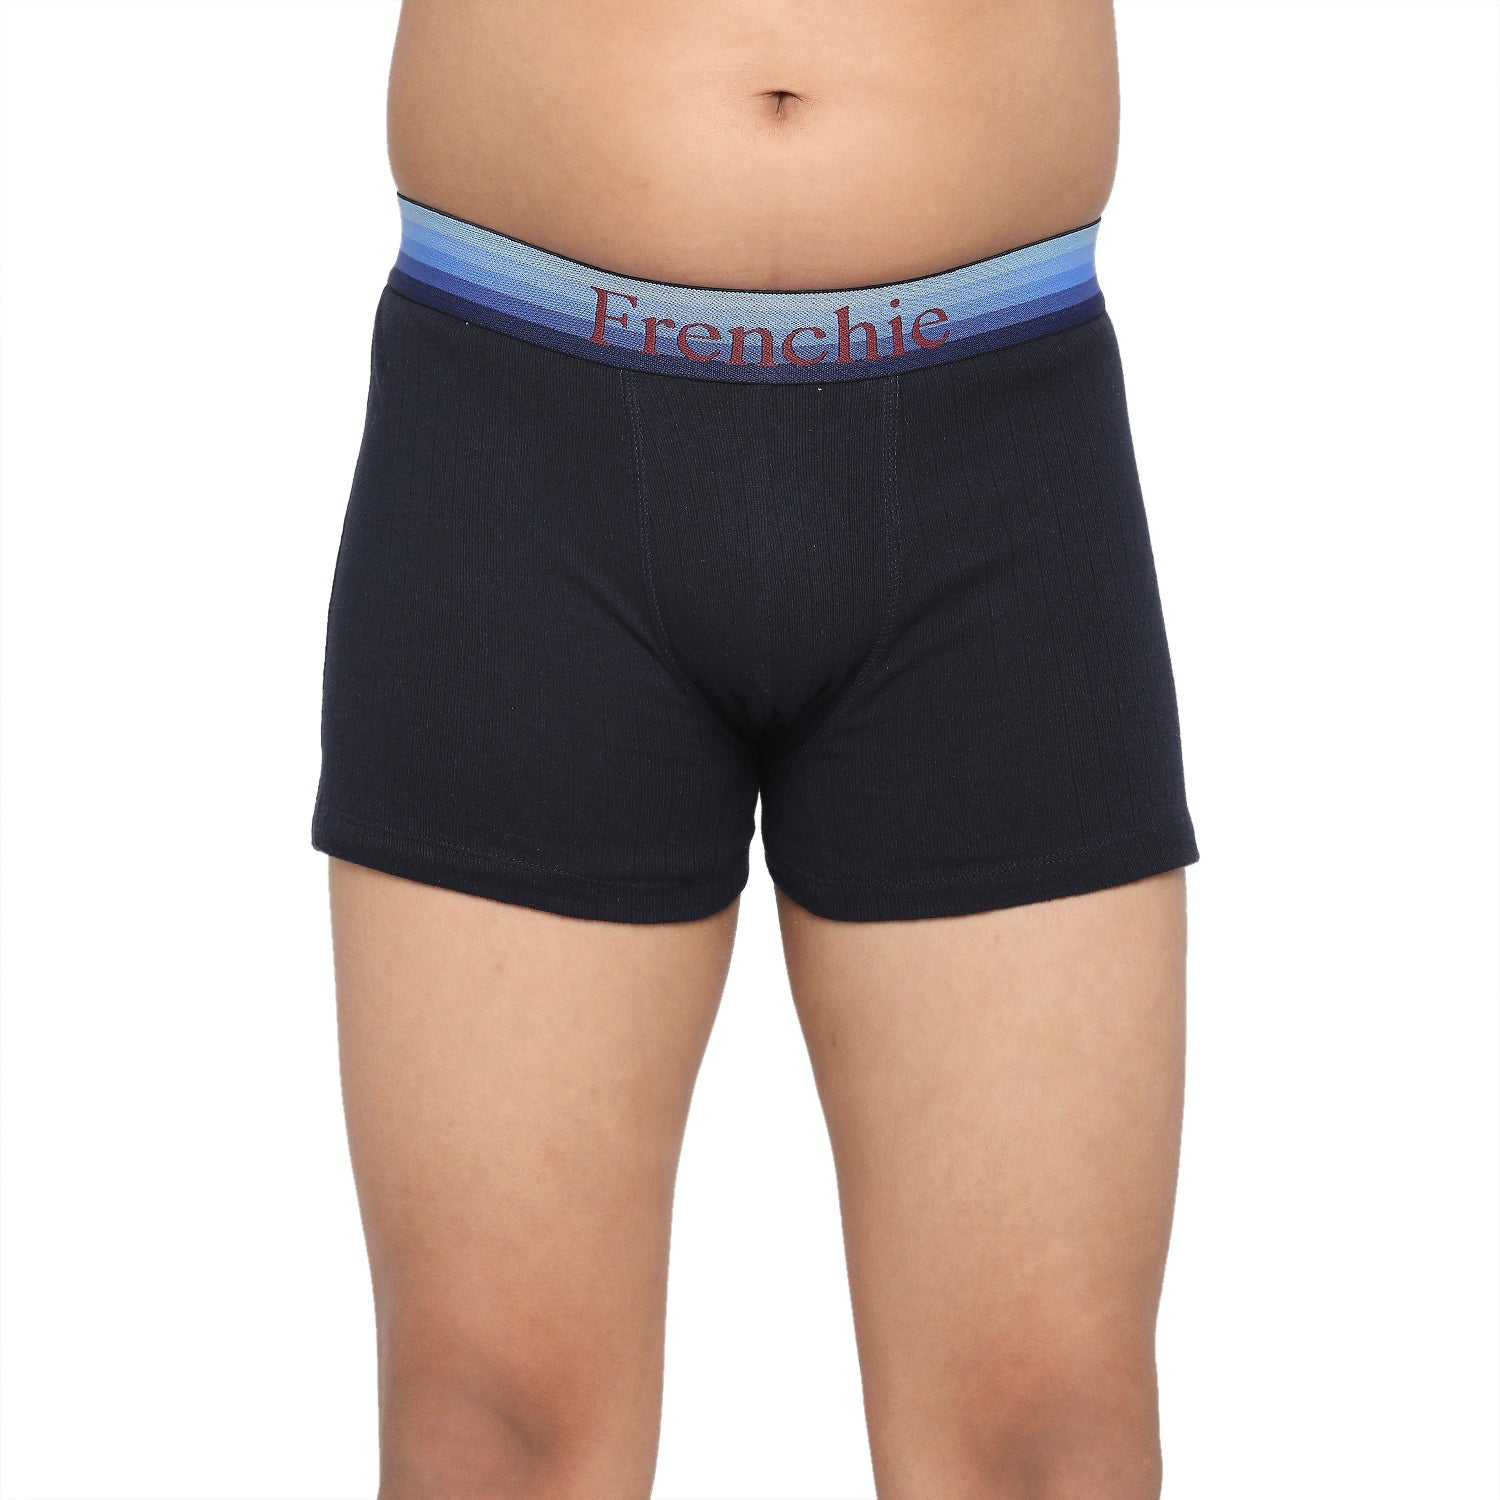 FRENCHIE Teenagers Cotton Trunk Navy and Gray - Pack of 2